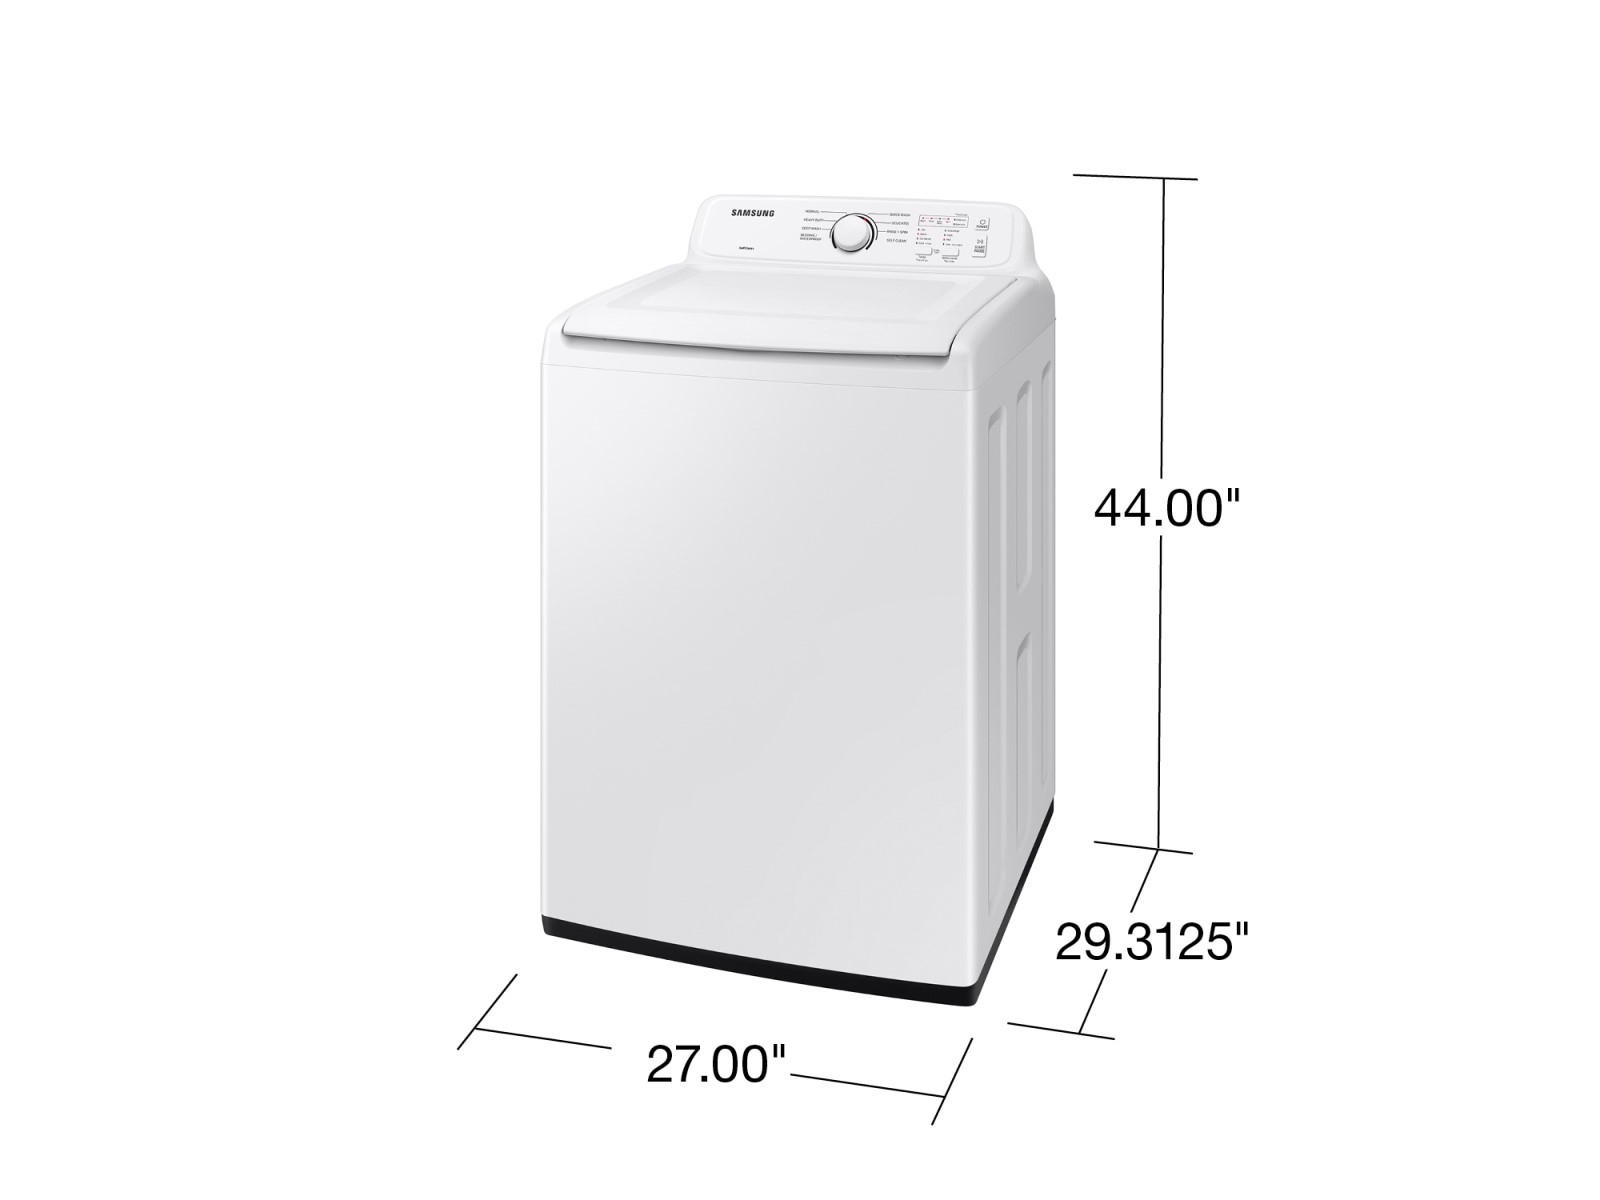 Rent to Own GE Appliances Space Saving 3.0 cu. ft. Top Load Washer